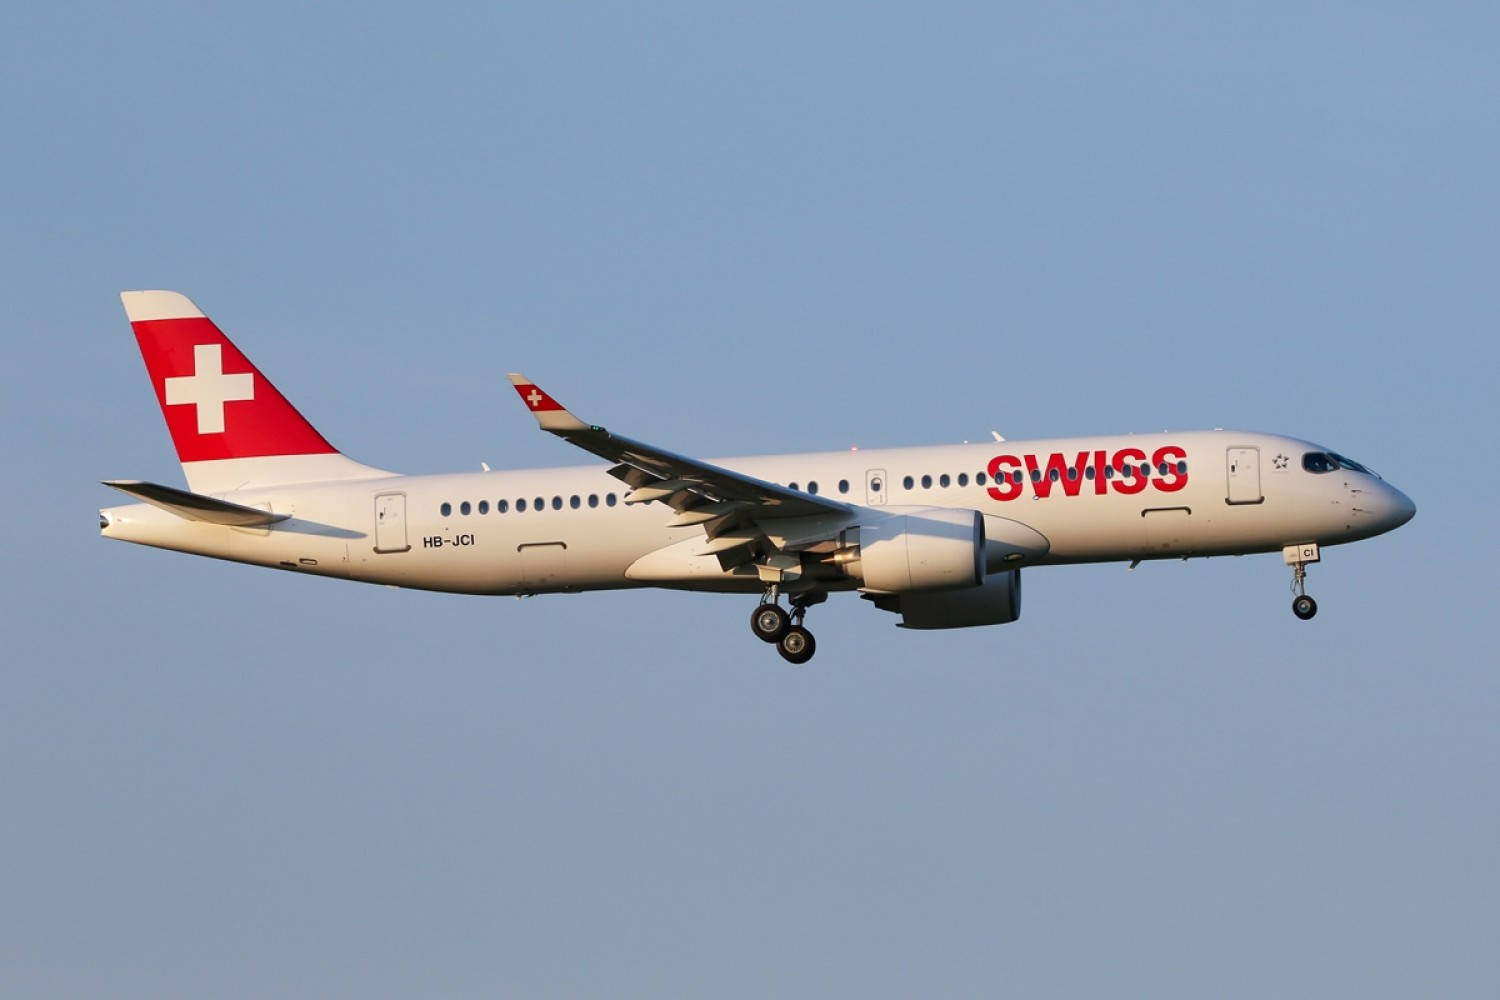 Swiss Airlines Flying In The Clear Sky Wallpaper